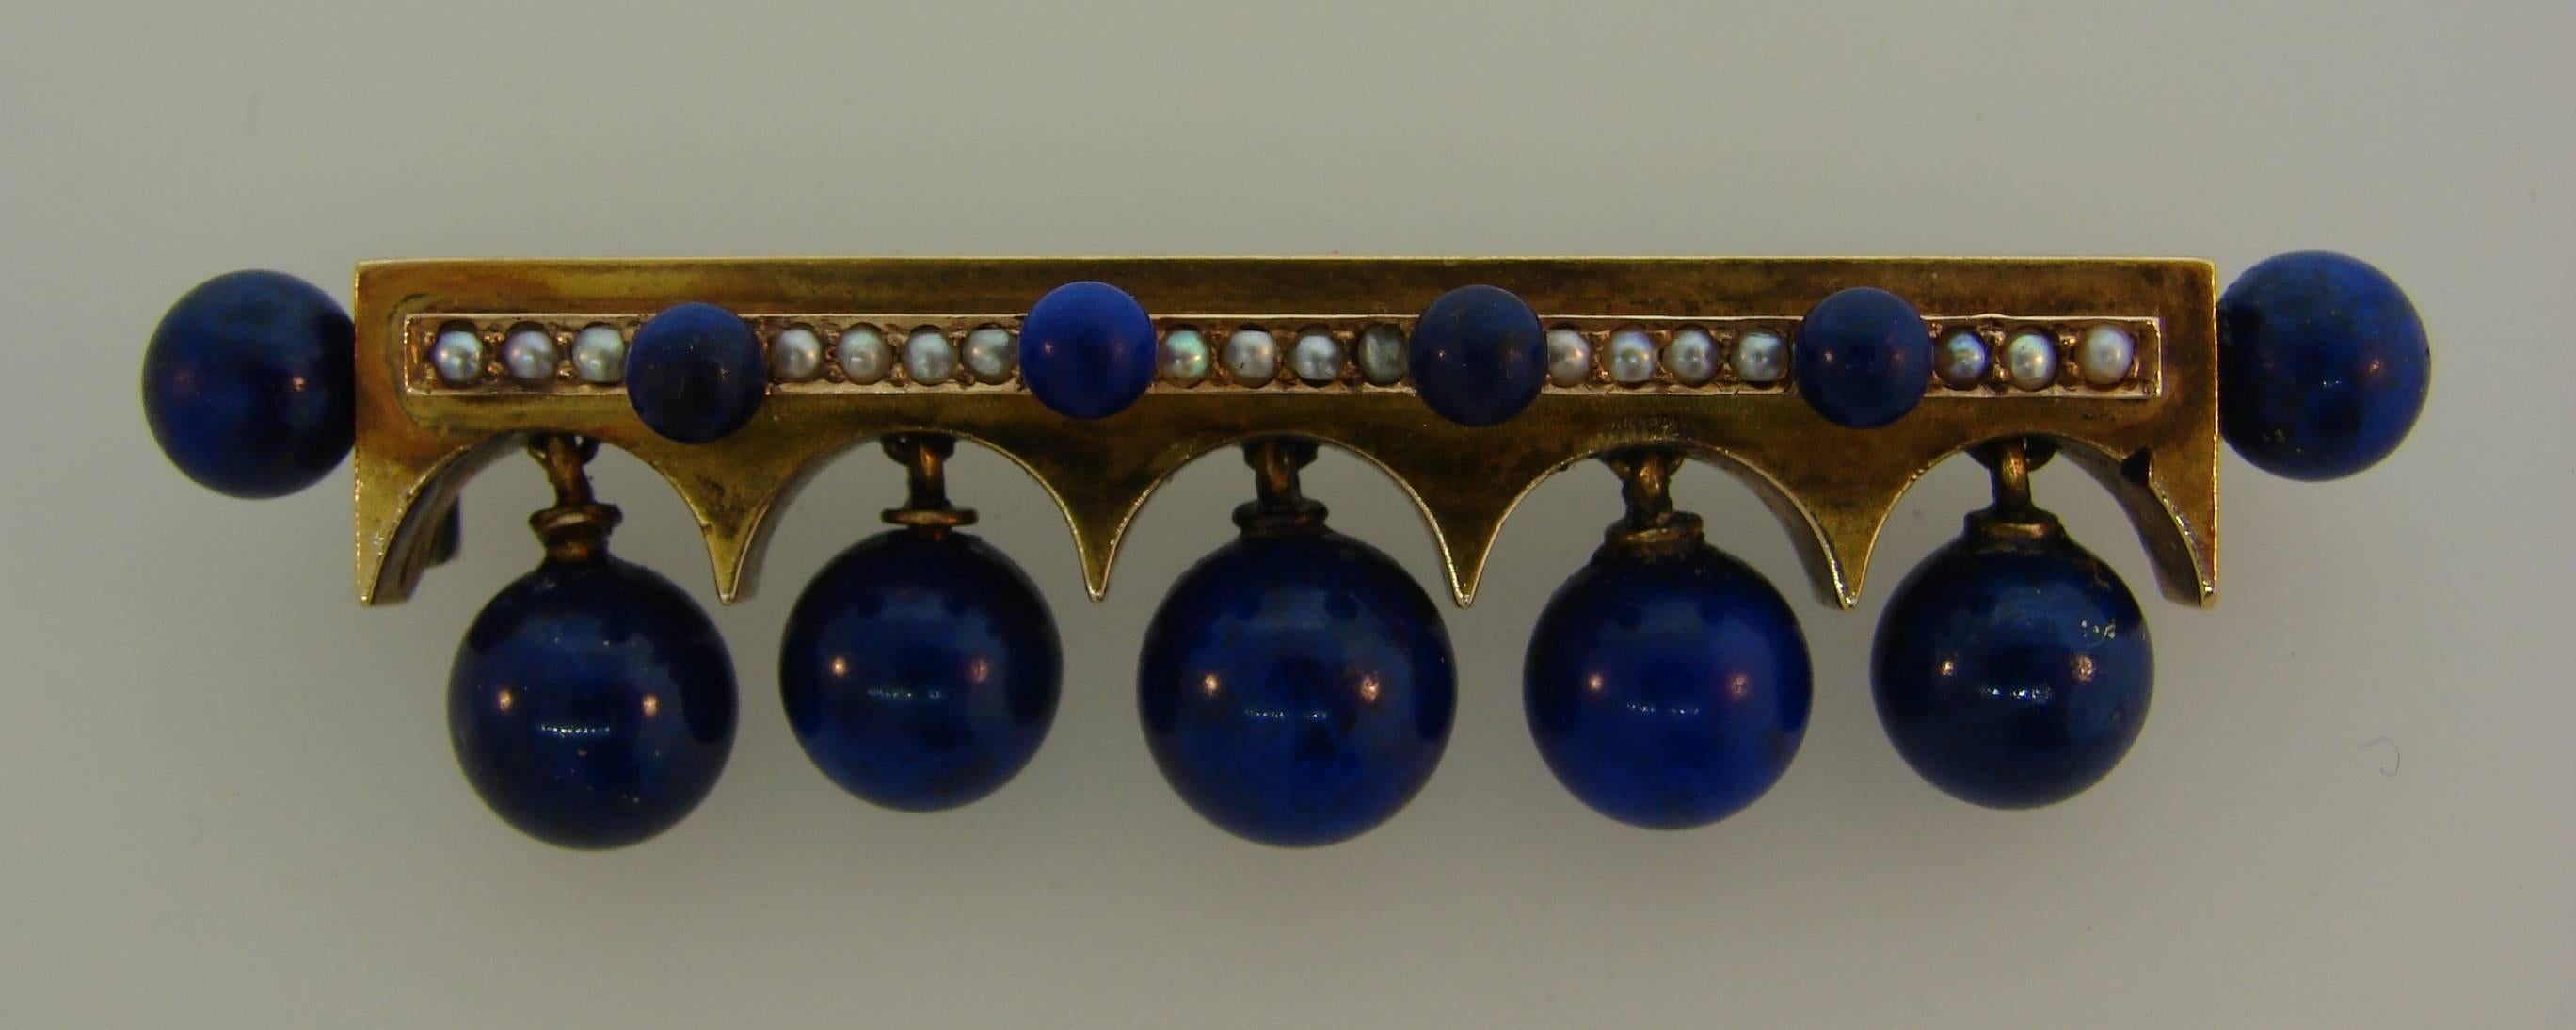 Fabulous Victorian pin, created in Europe on the turn of the 19th century. Well proportioned and wearable, the brooch is a great addition to your jewelry collection. 
Made of 15 karat (tested) yellow gold, lapis lazuli beads and seed pearls.
It